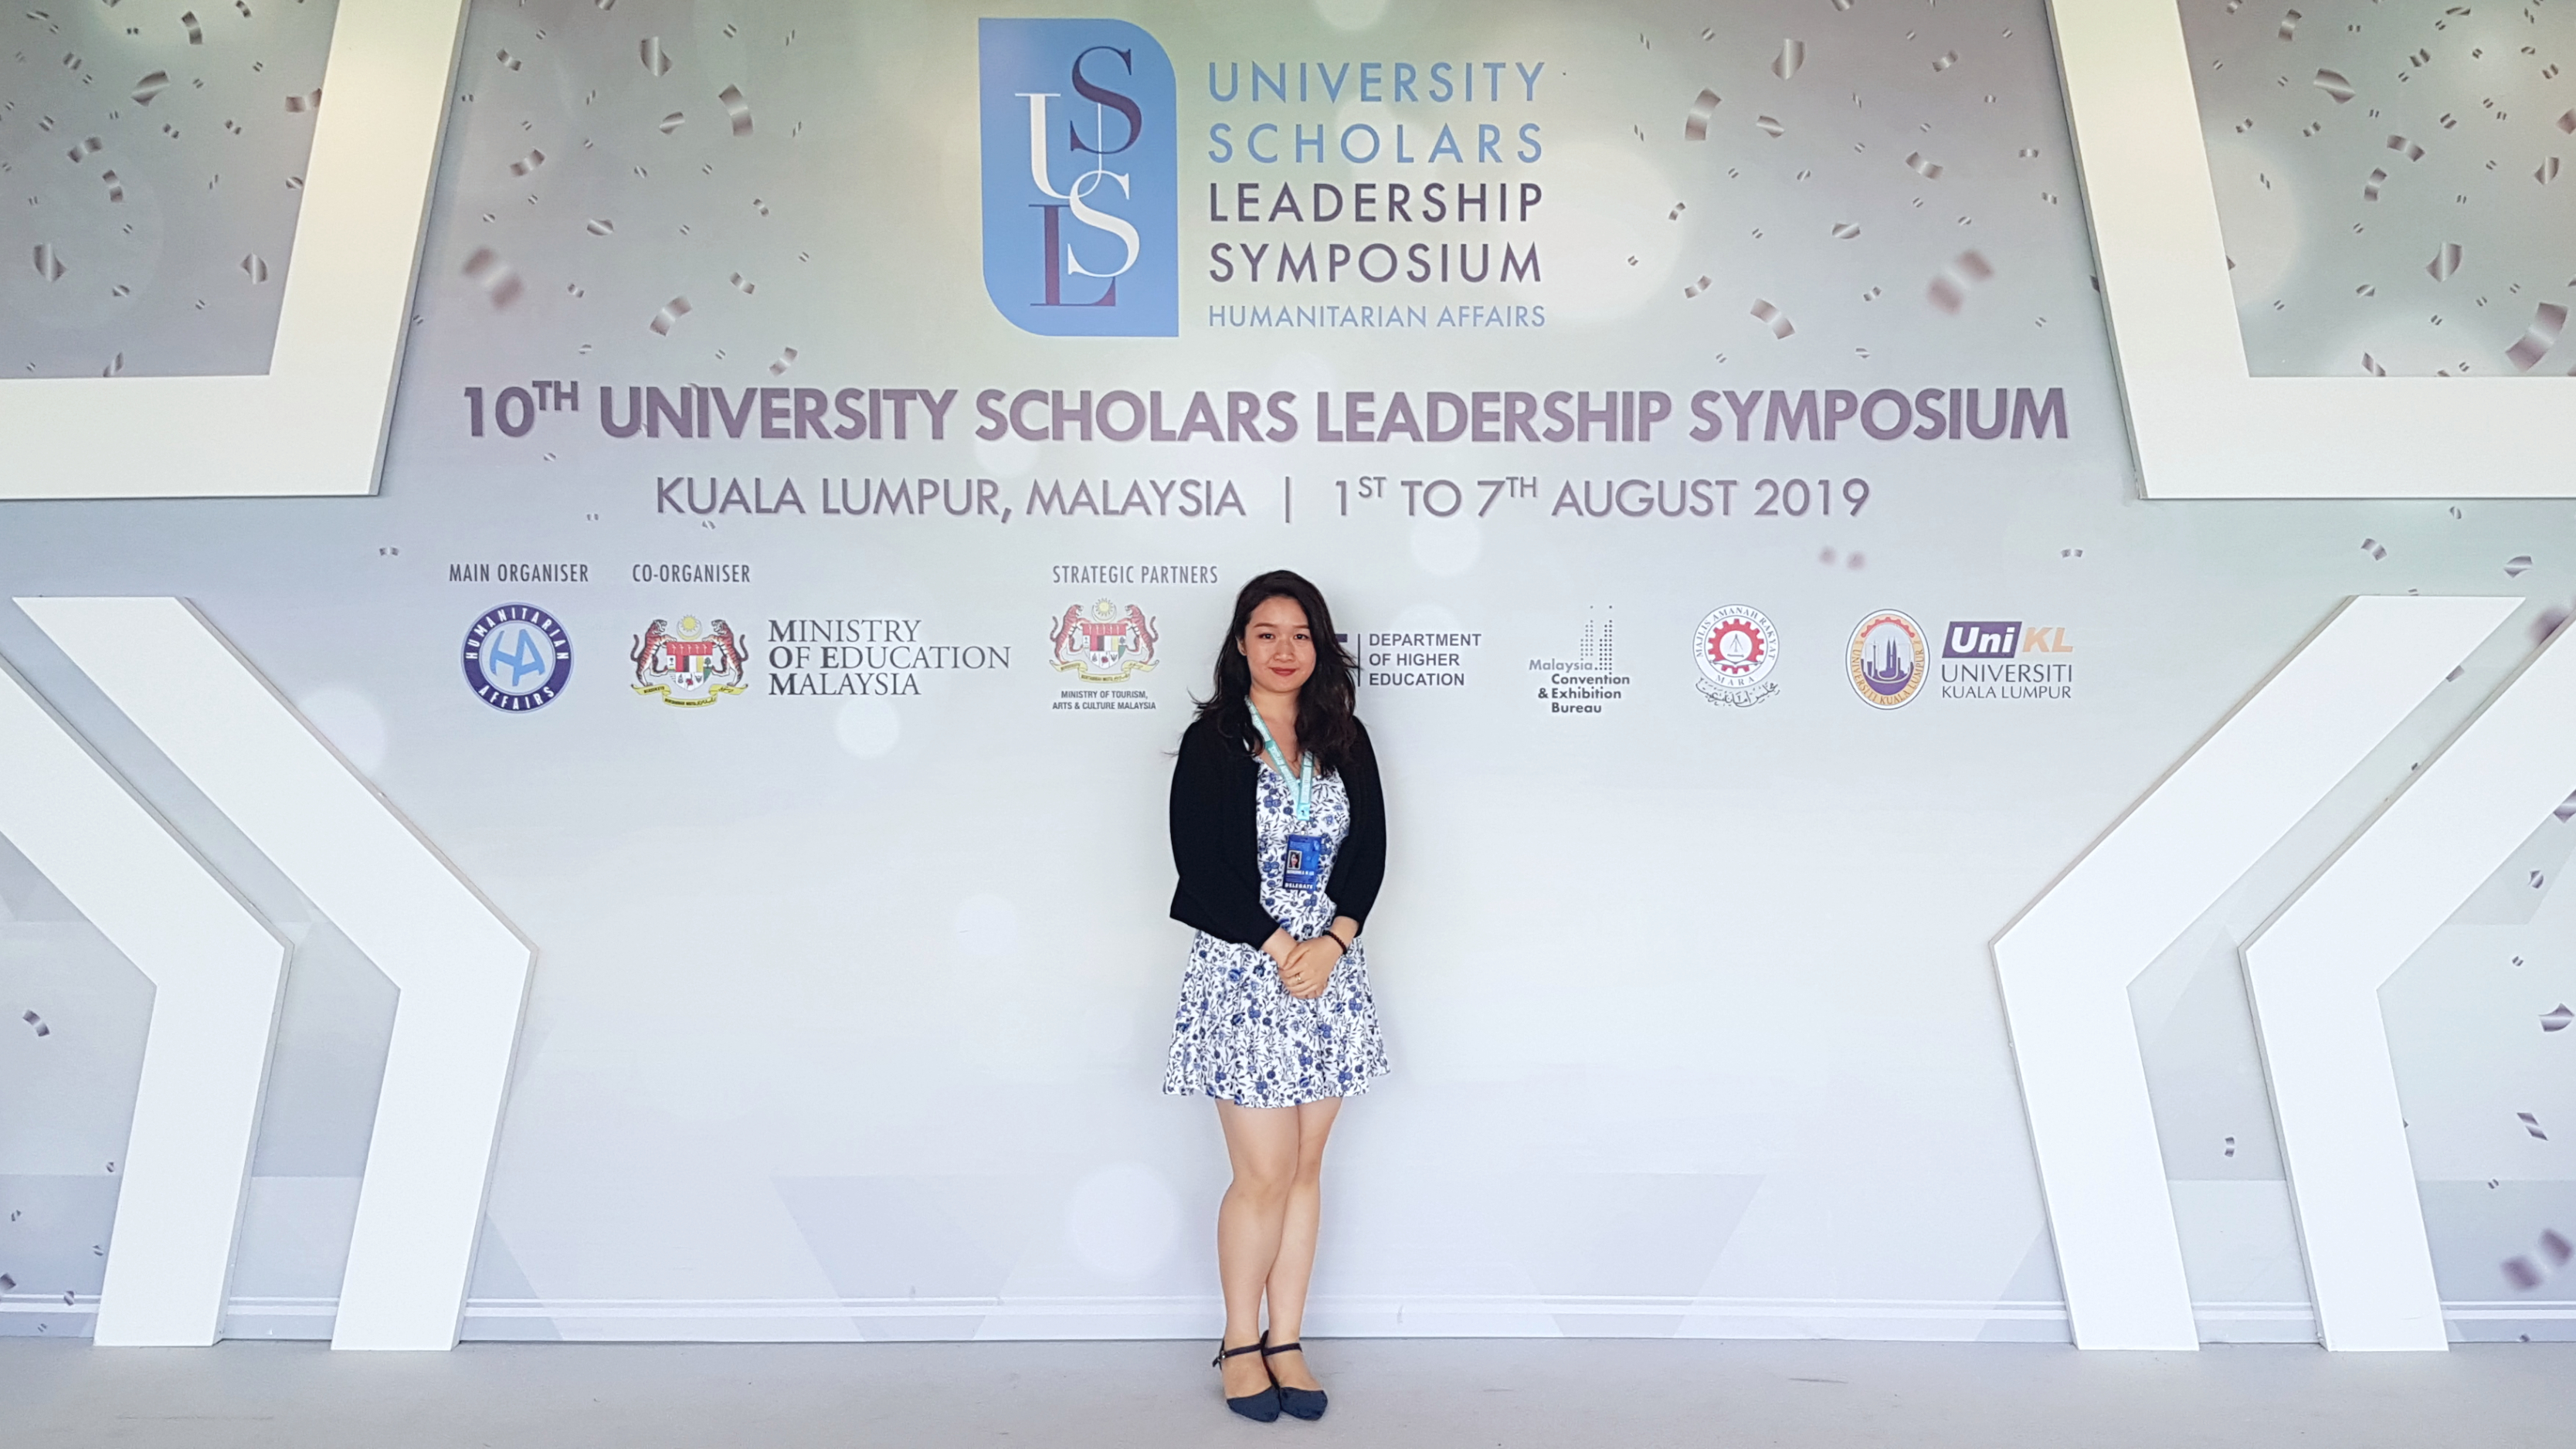 7th August 2019 – Ms. Michelle Cheng won the Online People's Choice Award in the HKU Visualise Your Thesis (VYT) Competition 2019